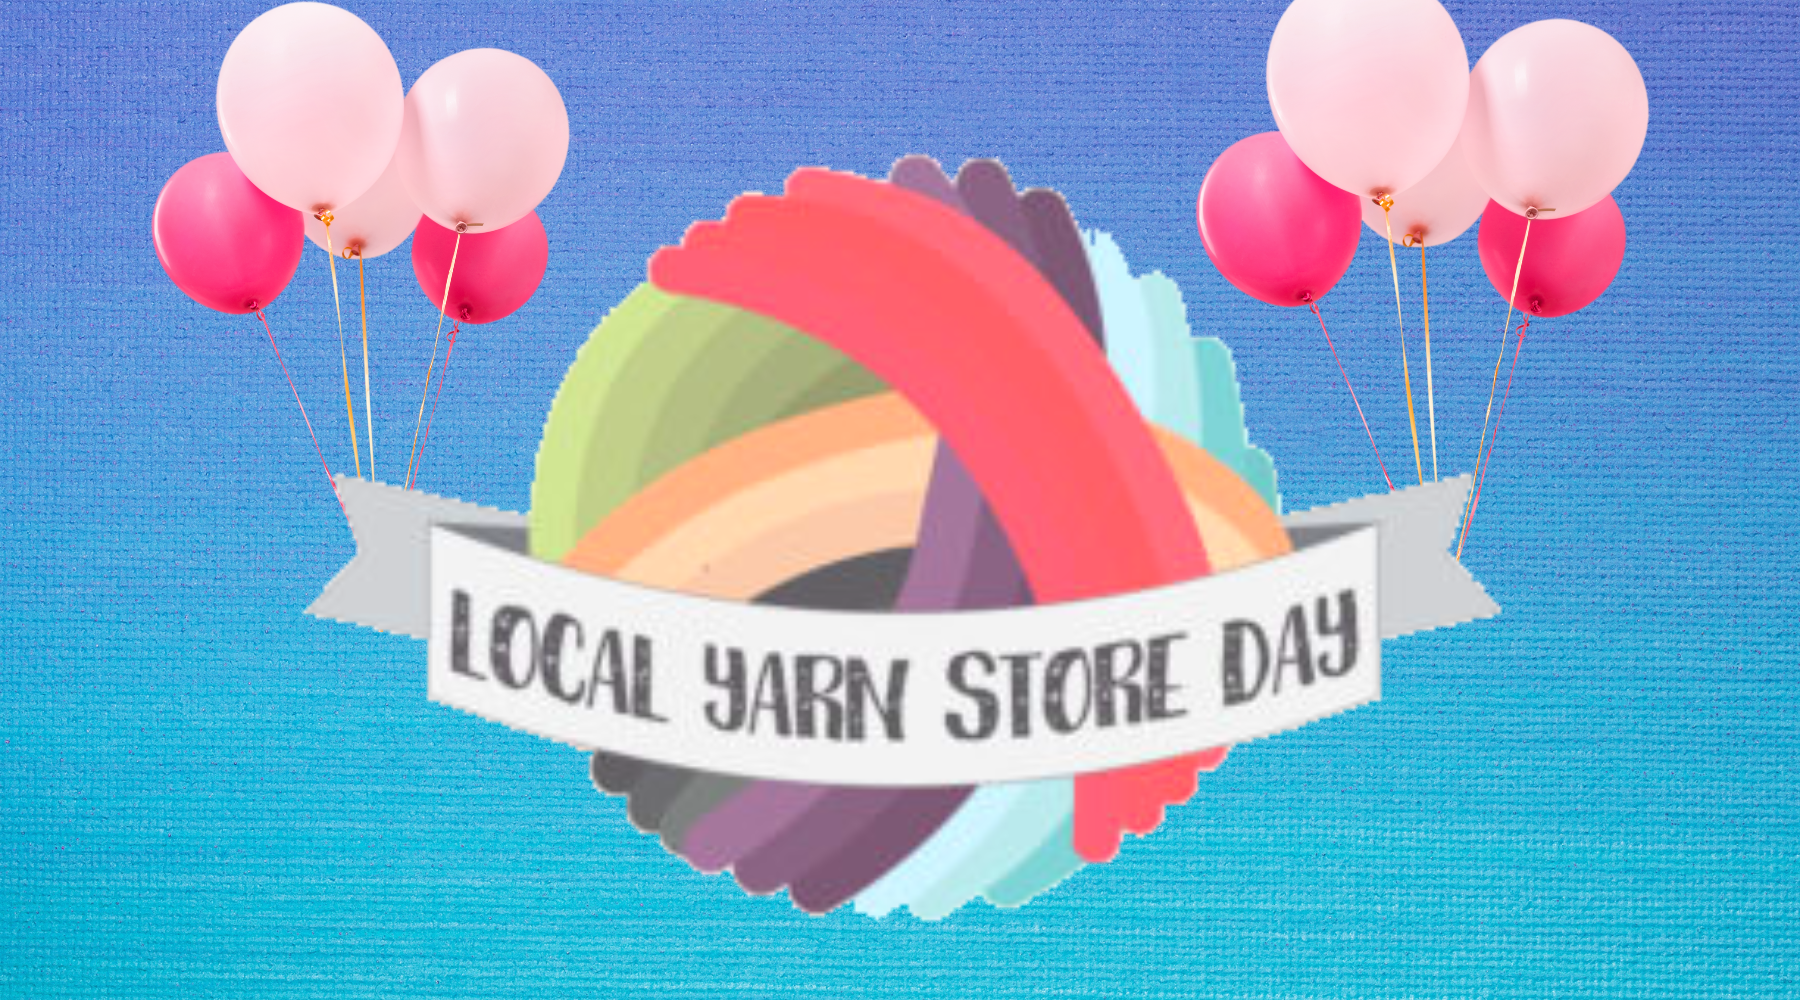 Top 10 reasons to love your Local Yarn Store